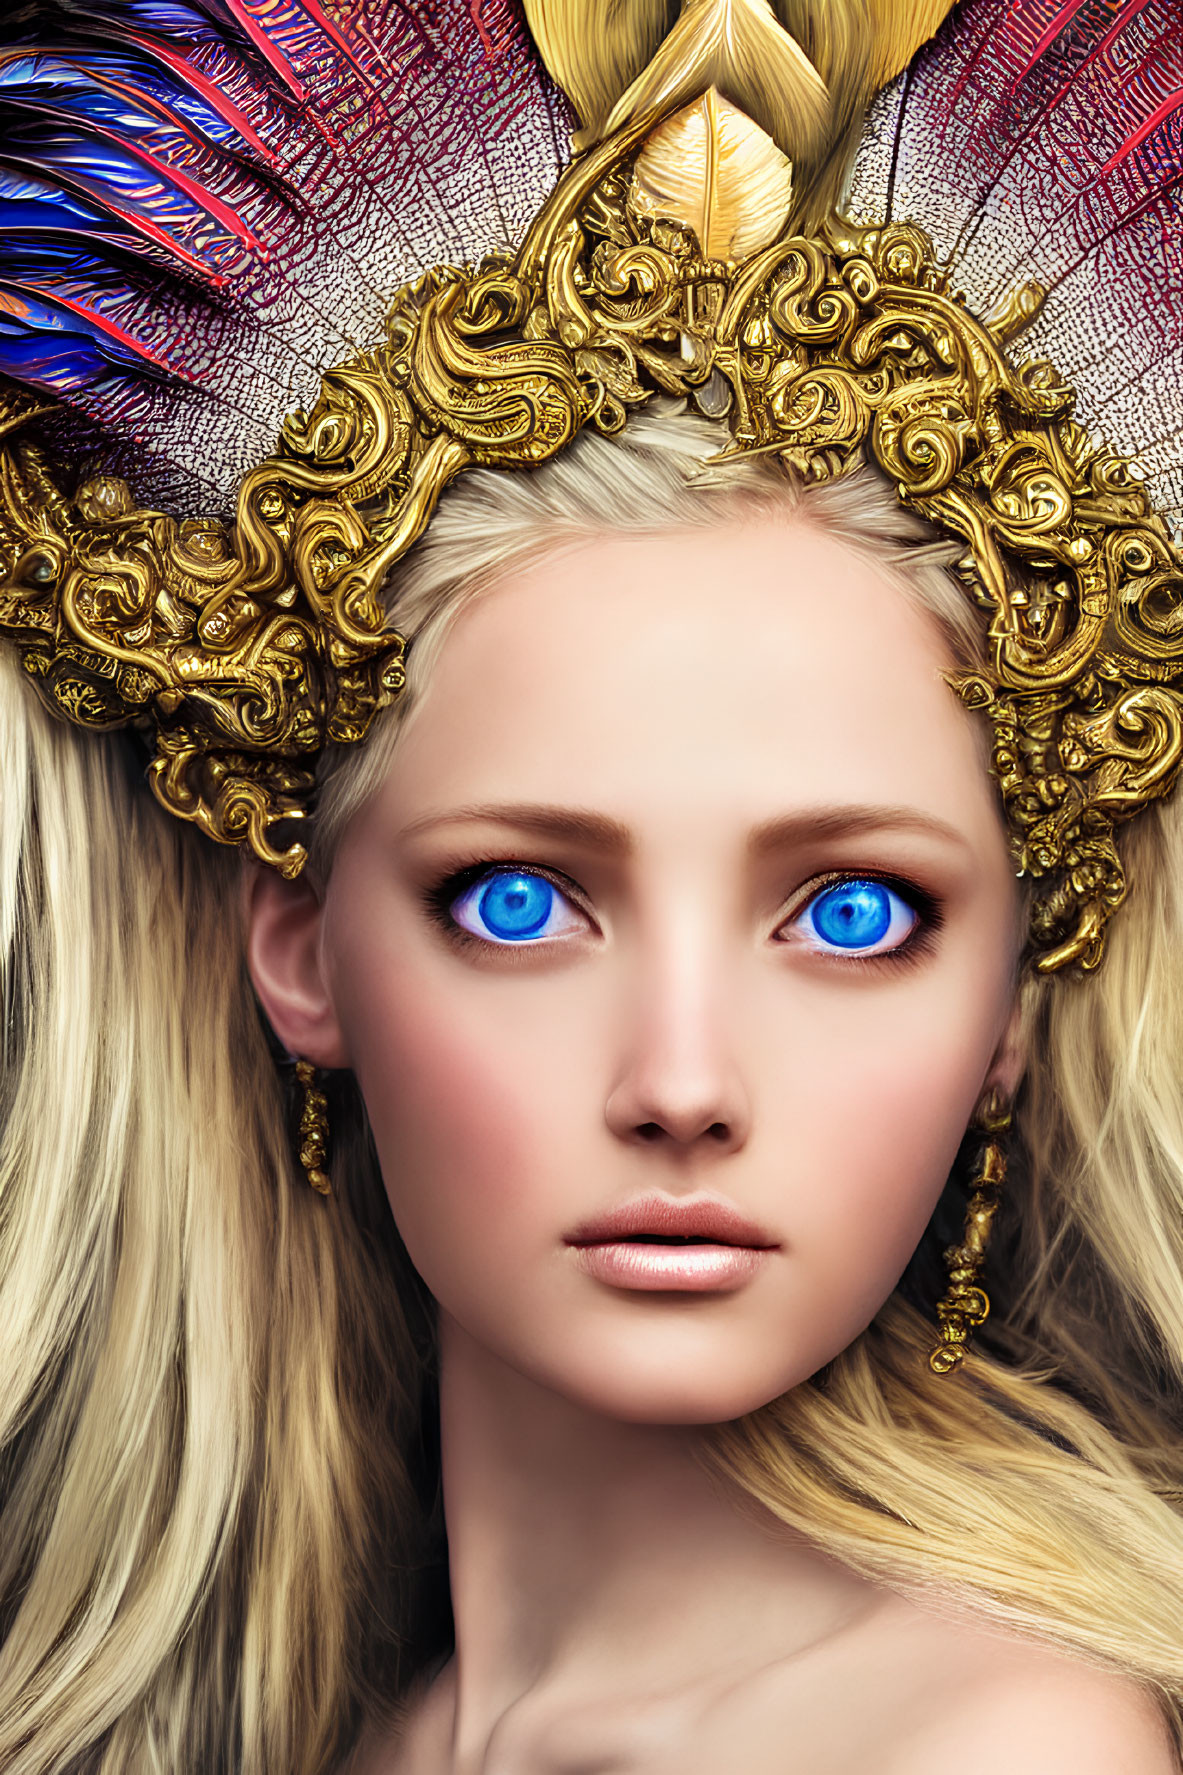 Digital portrait of woman with blue eyes, blonde hair, and ornate golden headpiece